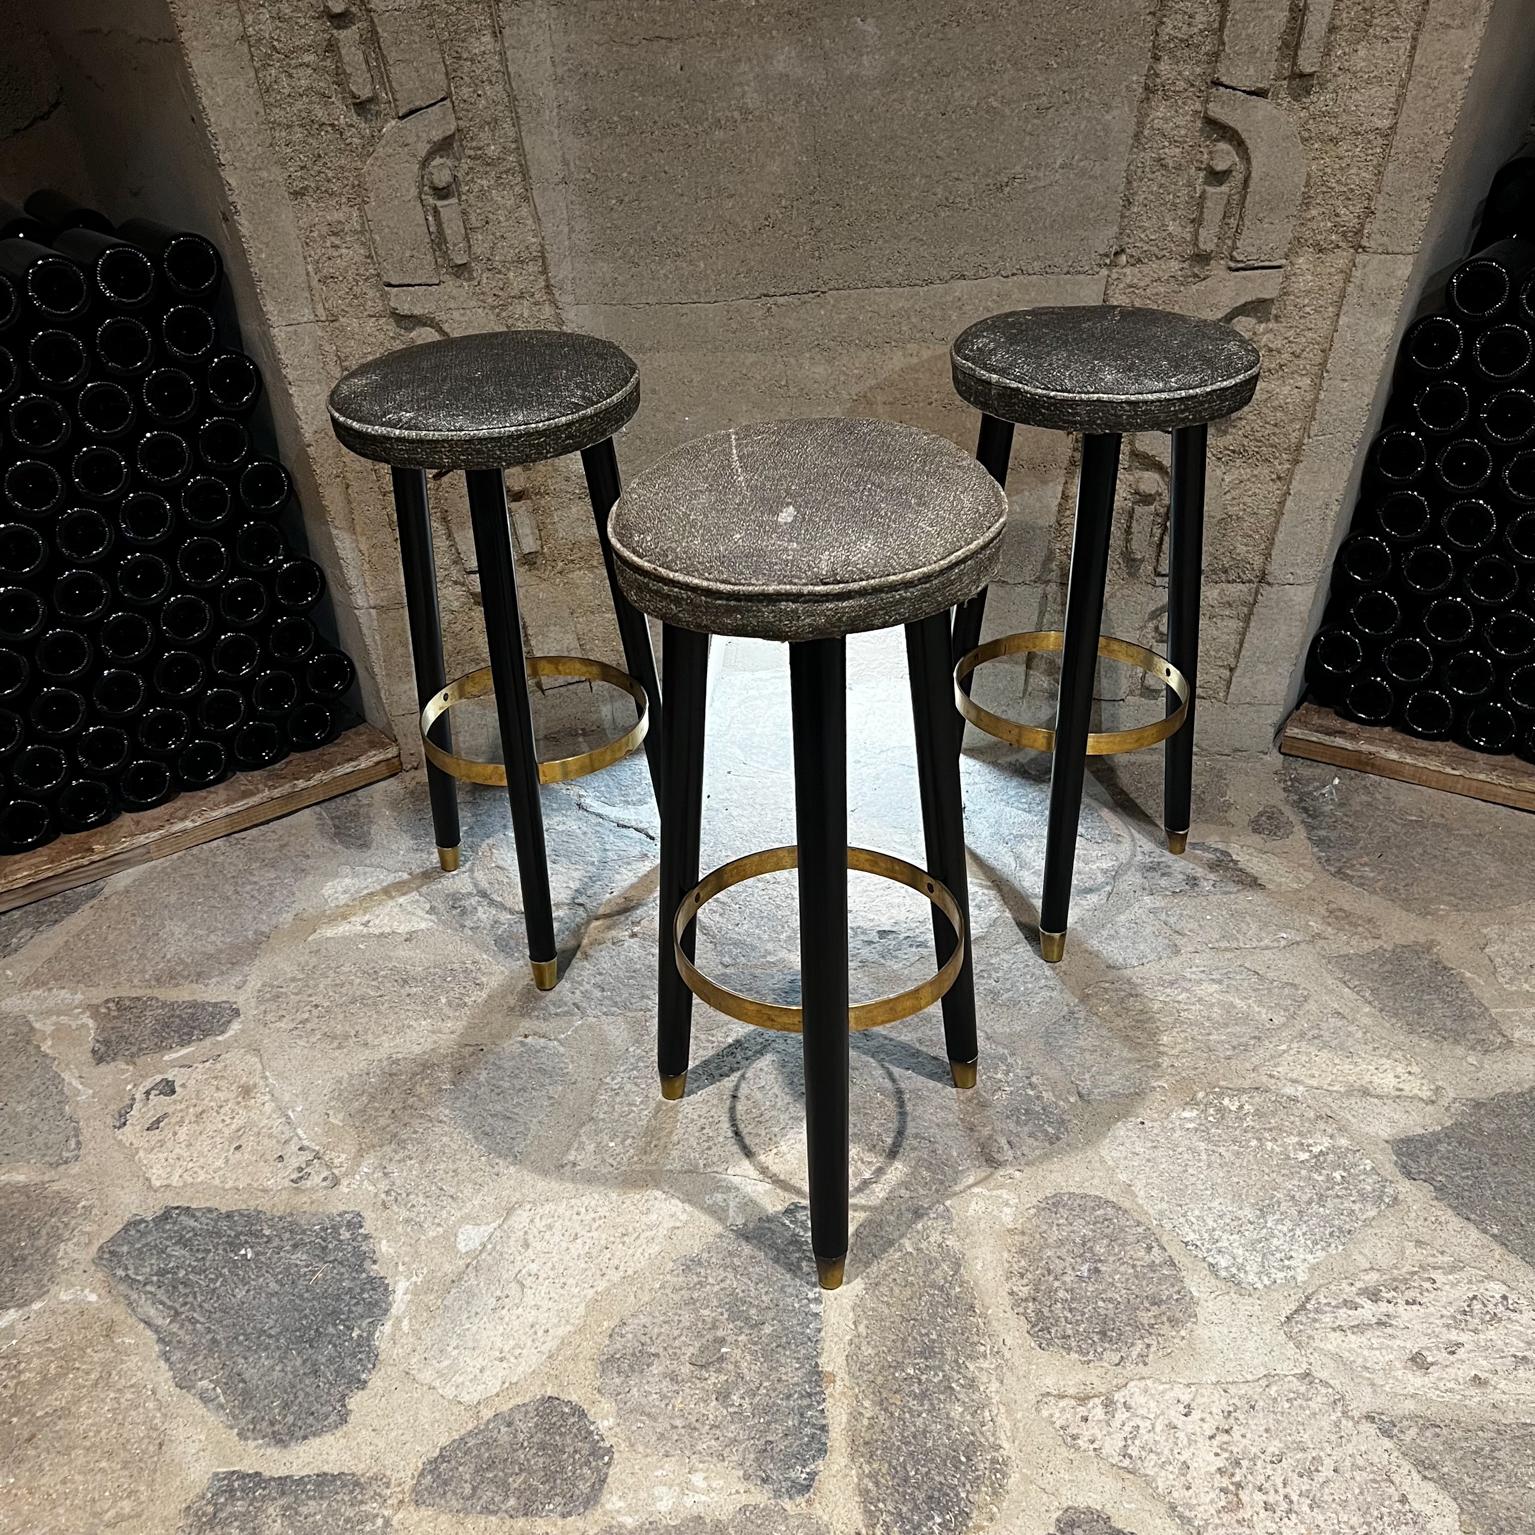 Sensational 1950s Bar Stools Set of 3 Gray Naugahyde, Brass & Black Satin Wood
Made in Mexico.
Solid wood legs with black satin finish
Refreshed preservation to the wood finish.
Brass ring for footrest support provides stability.
Retains all